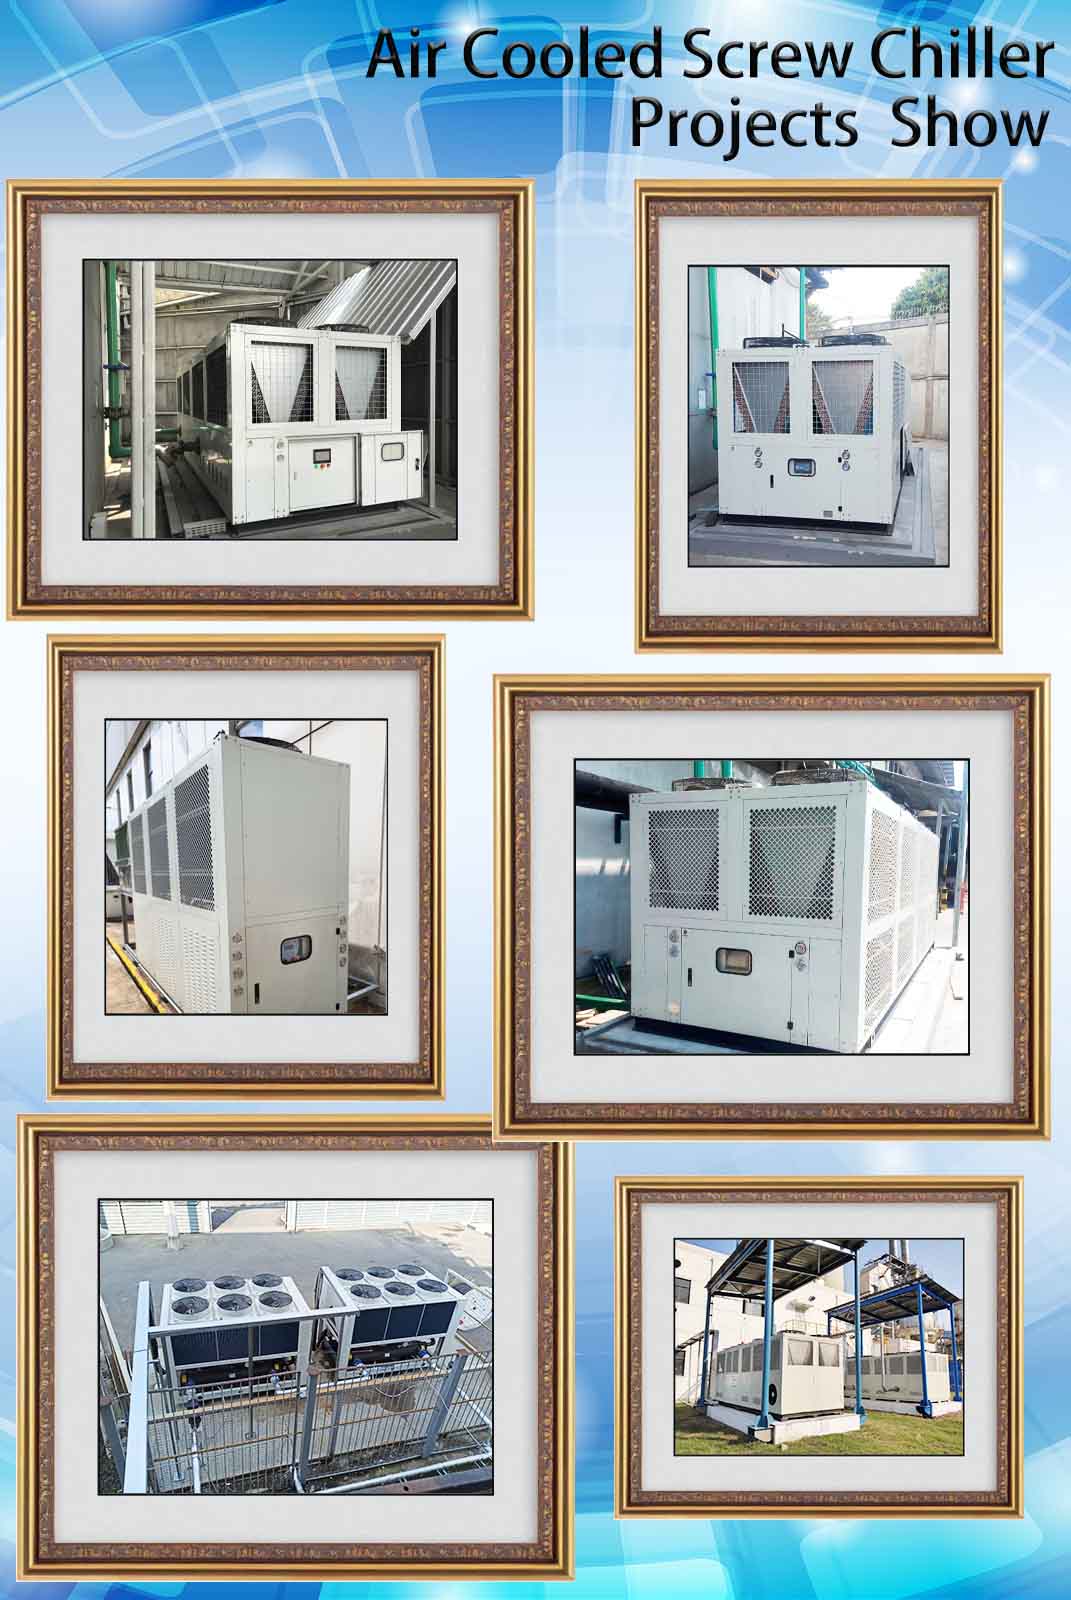 Air cooled screw chiller projects